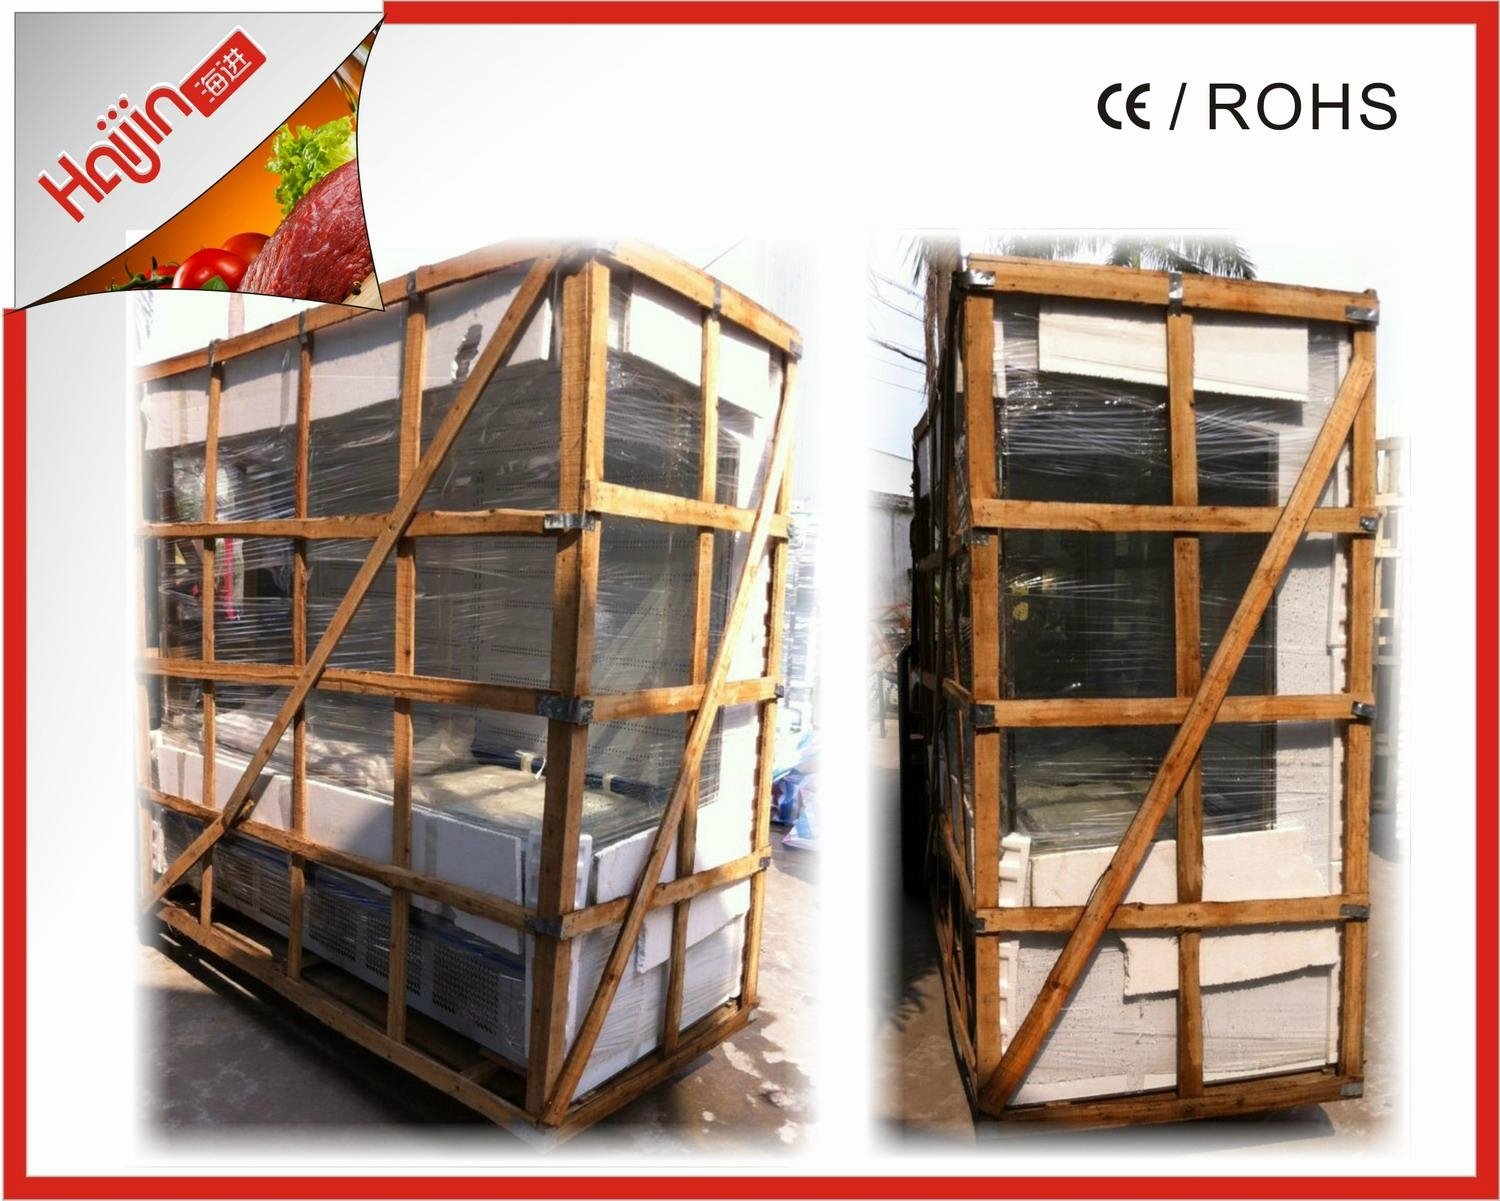 Vegetable display cabinet can be customized depend on request  2